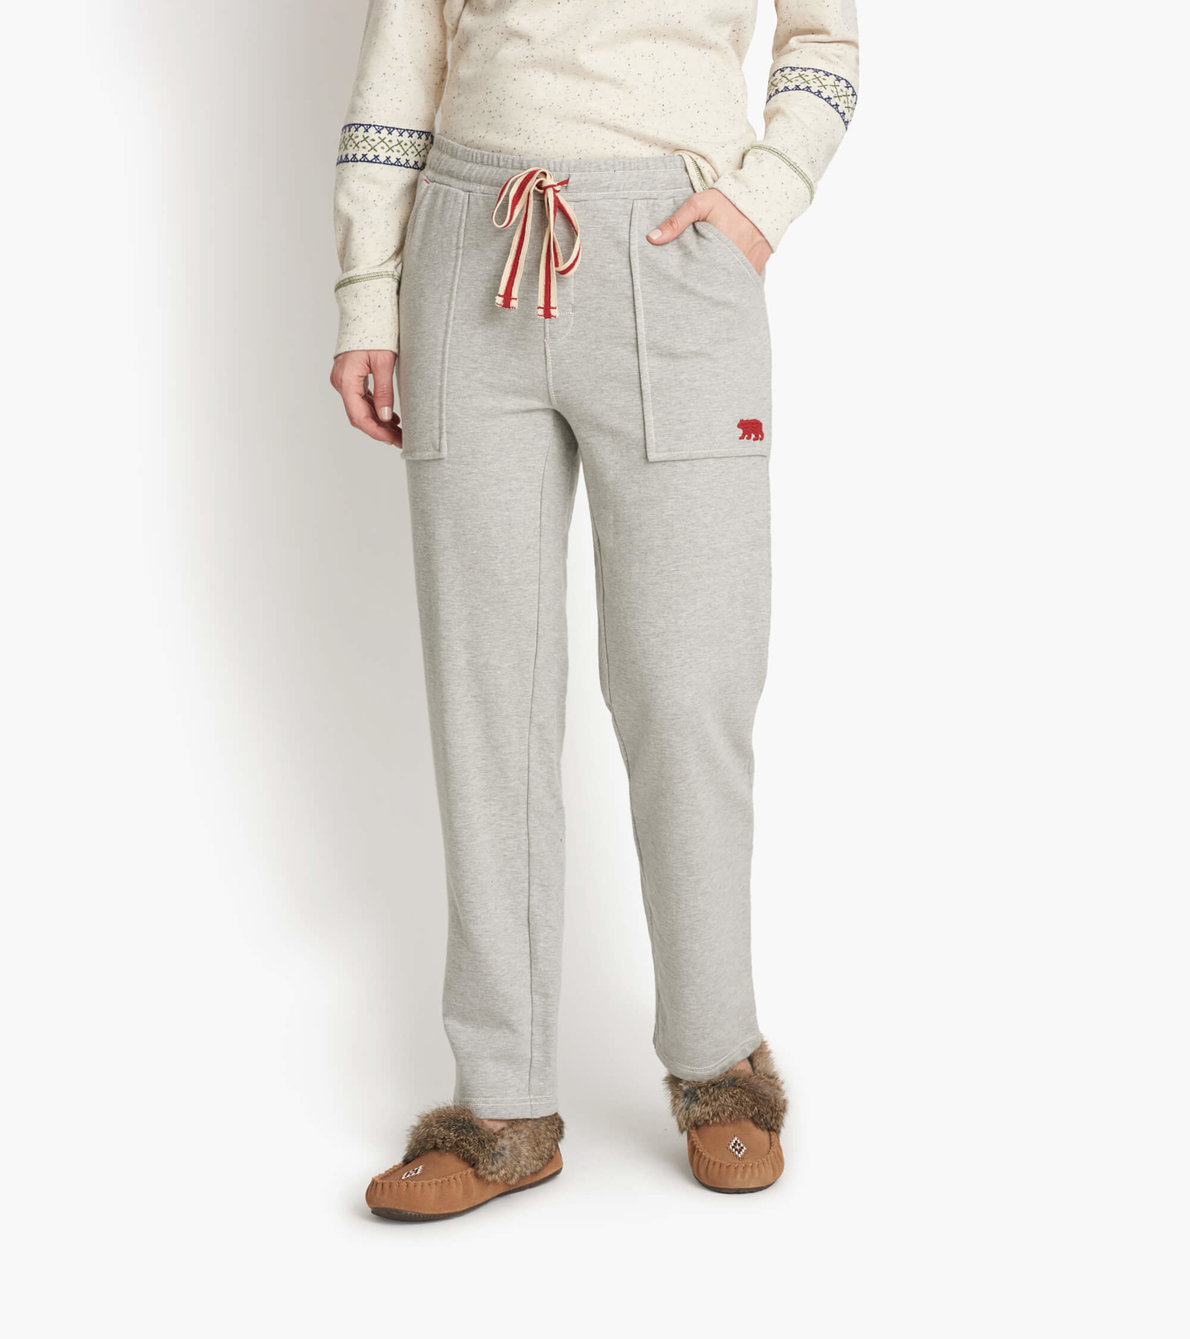 View larger image of Grey Women's Heritage Joggers